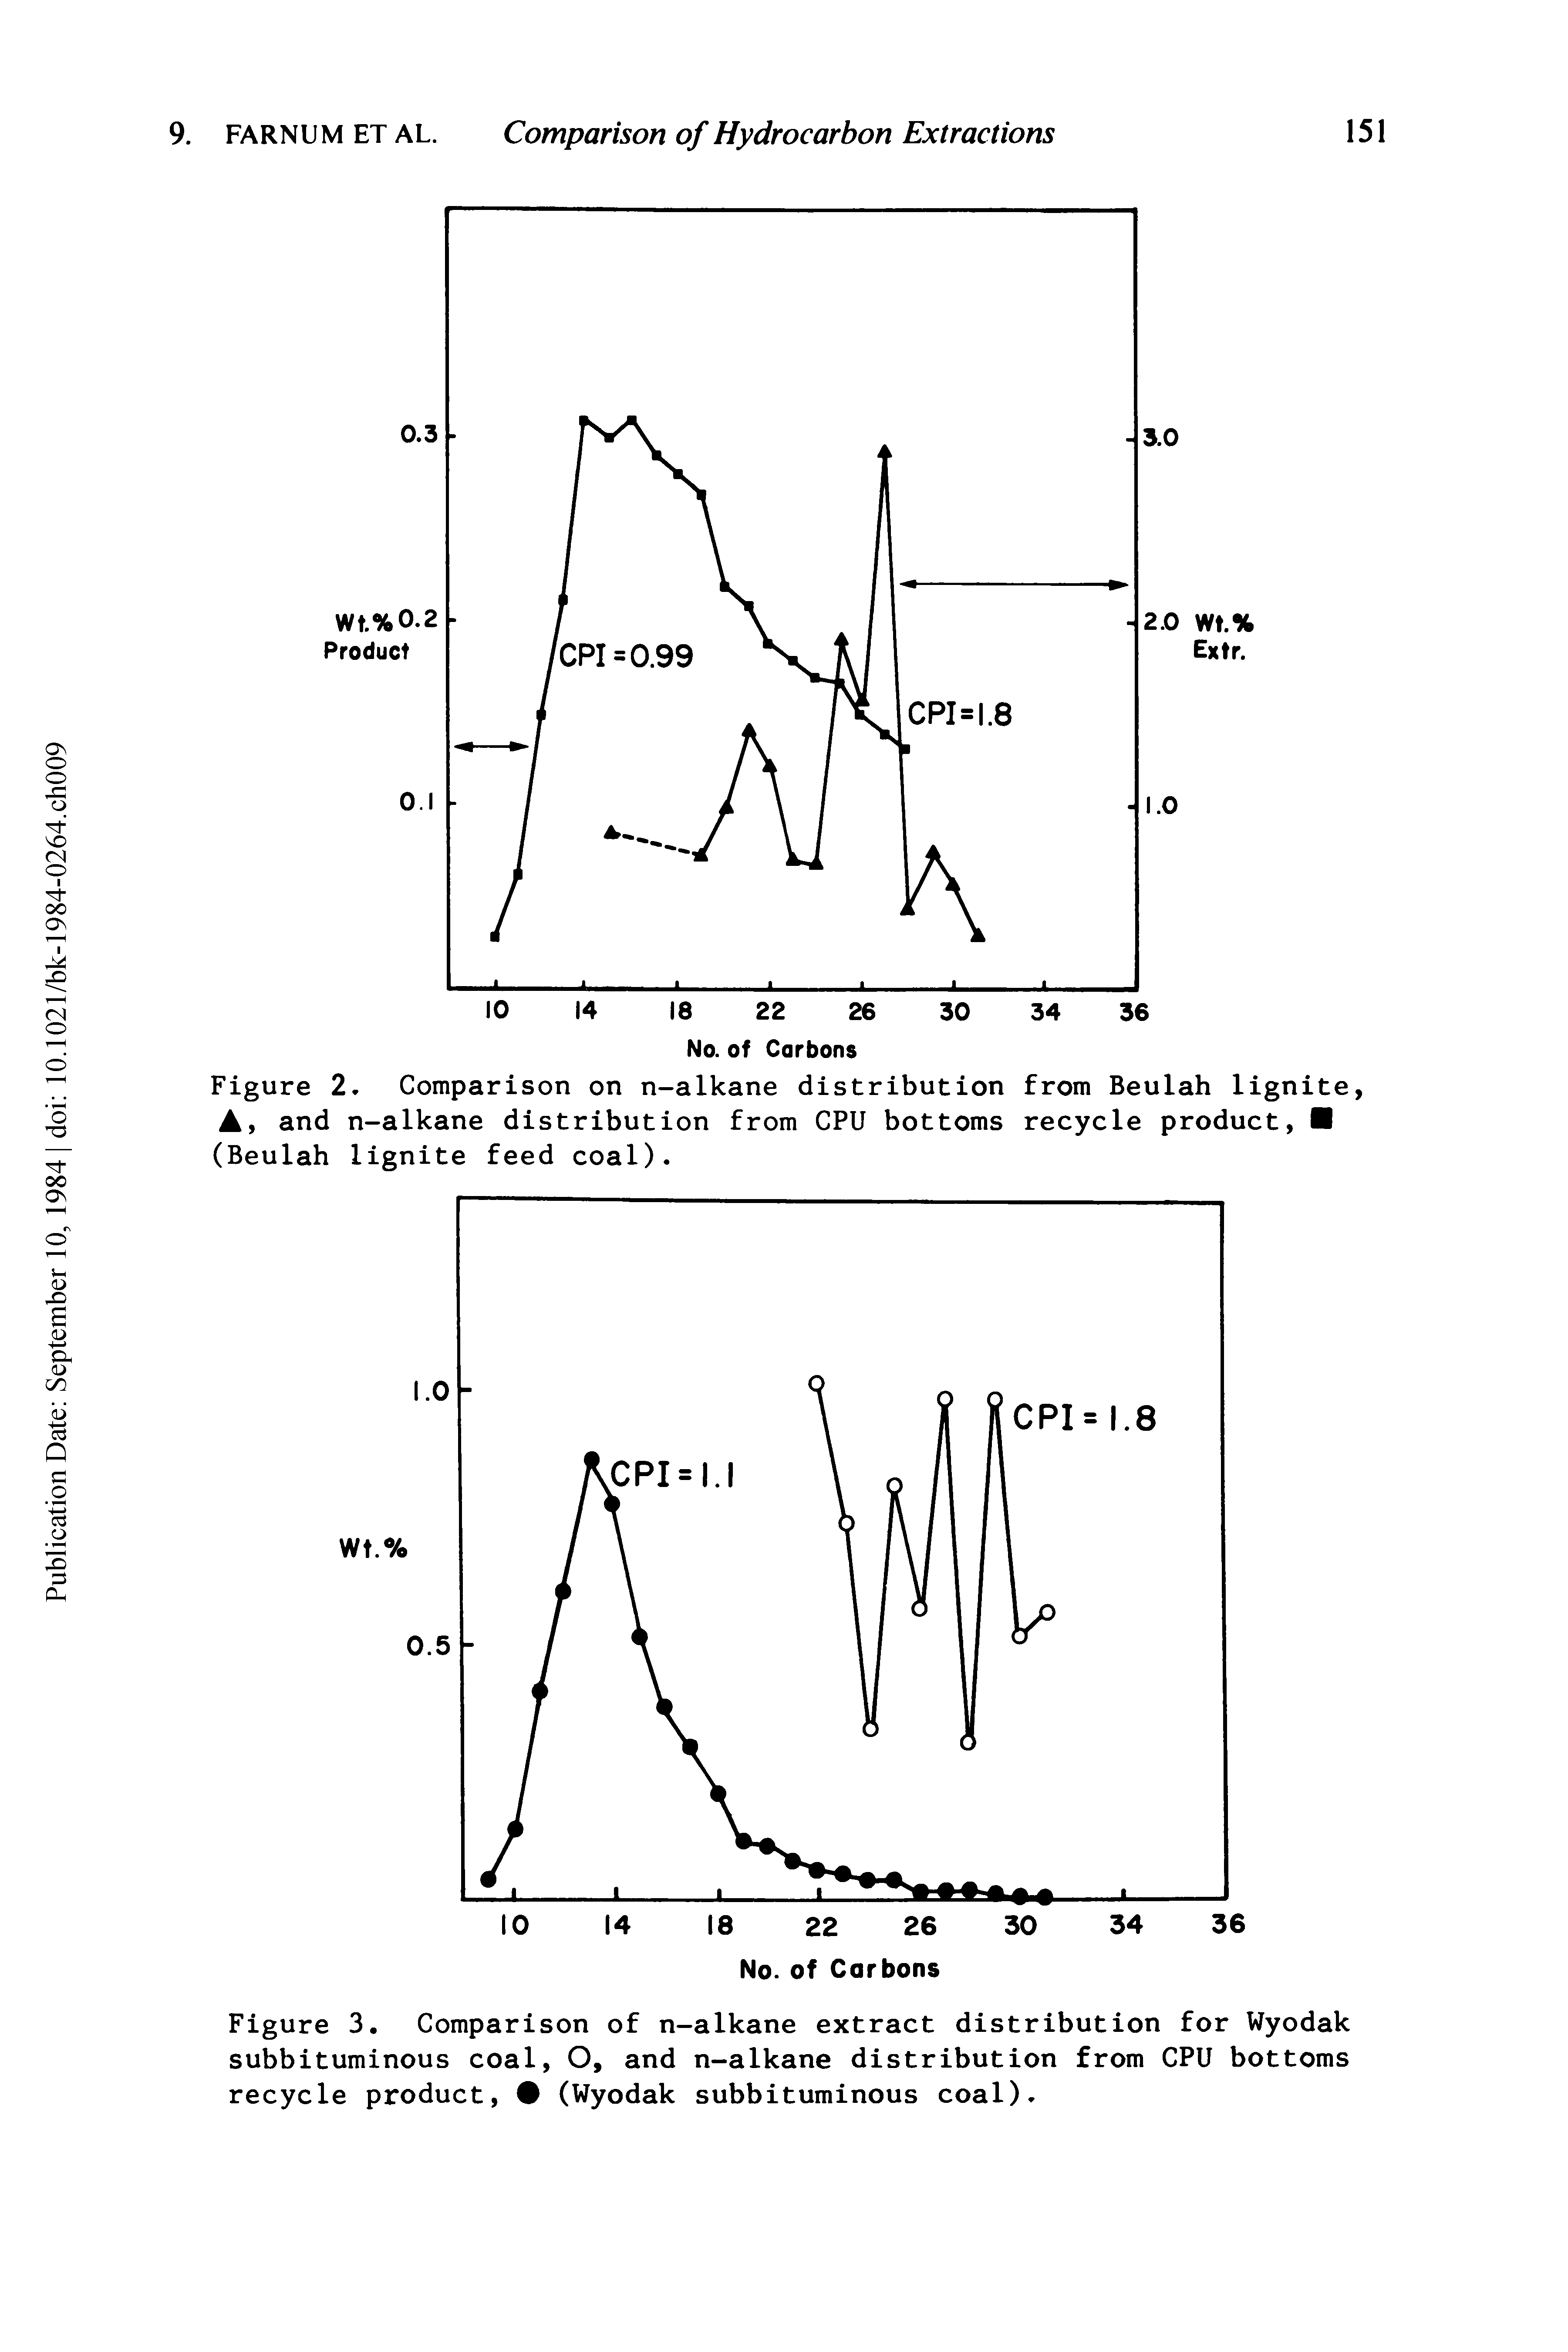 Figure 2. Comparison on n-alkane distribution from Beulah lignite, A, and n-alkane distribution from CPU bottoms recycle product, (Beulah lignite feed coal).